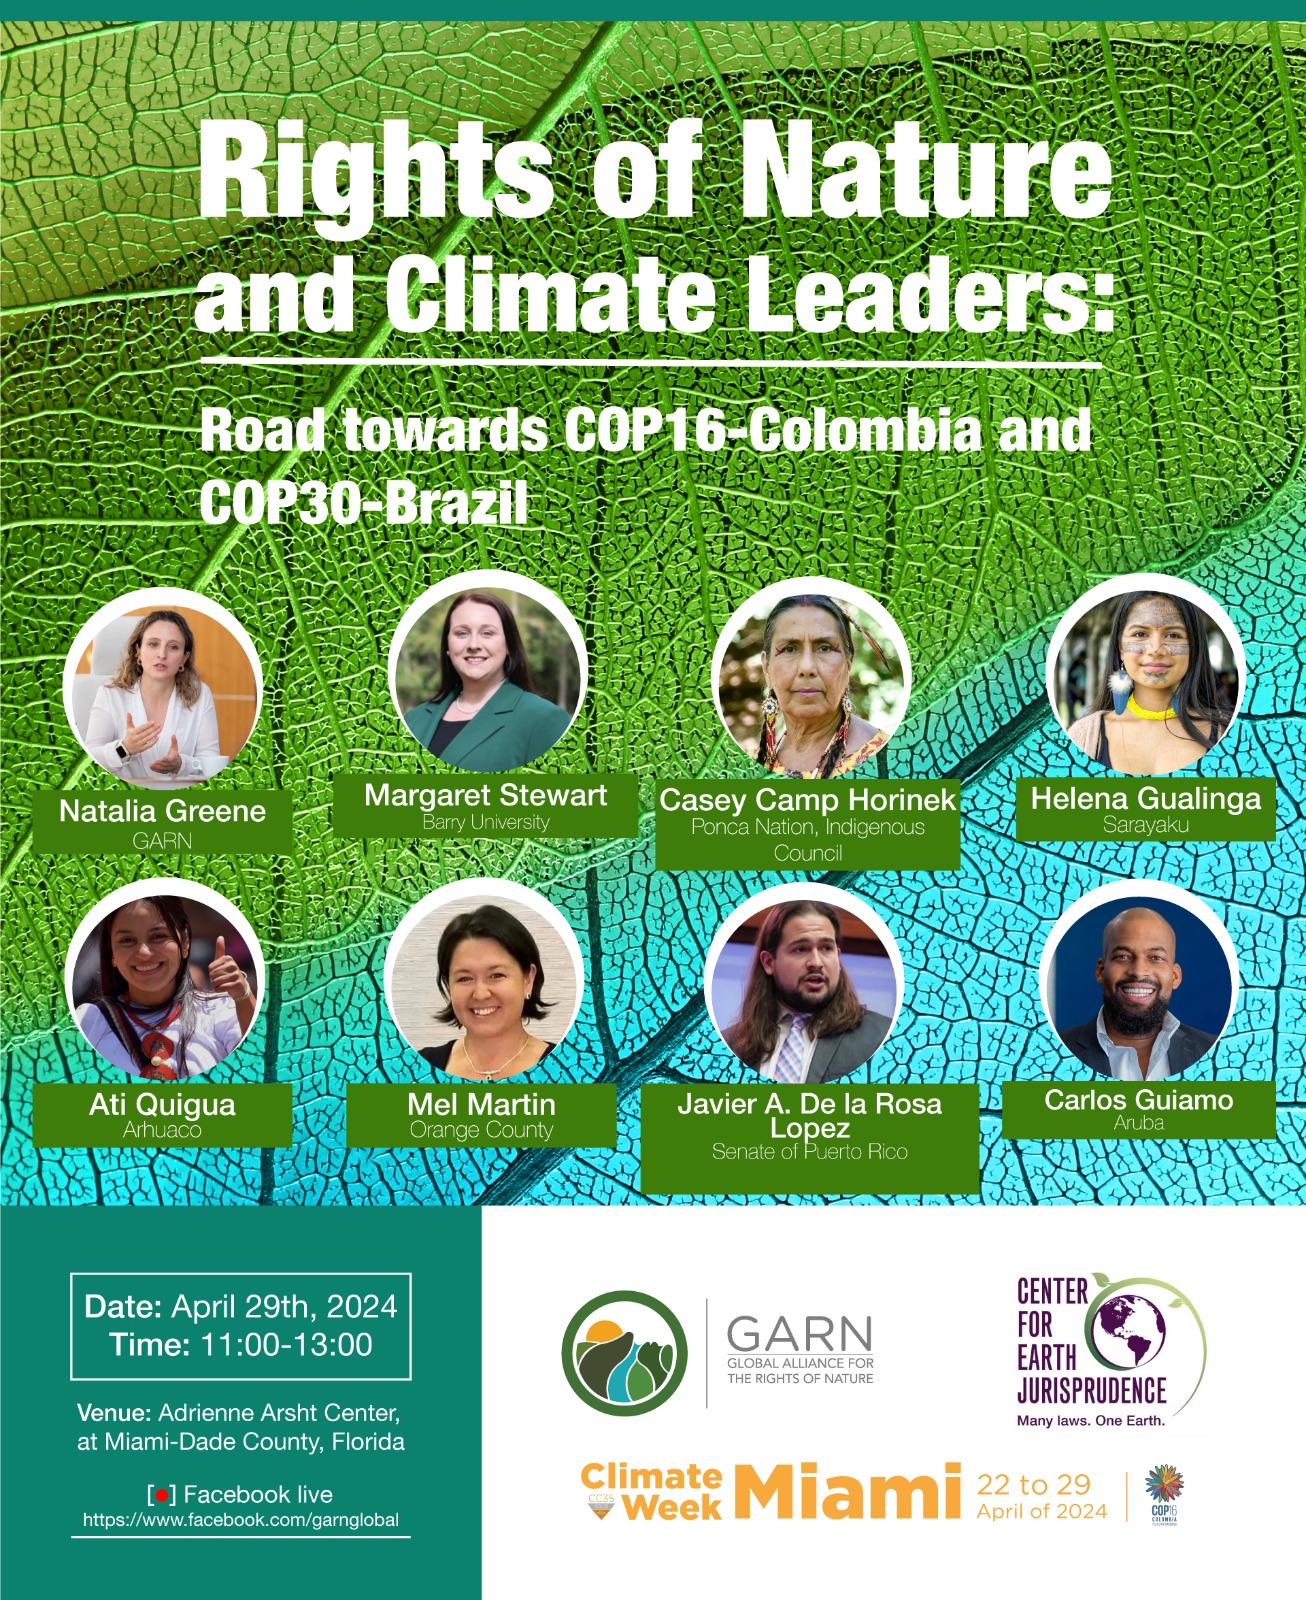 Rights of Nature and Climate Leaders: Road towards COP16-Colombia and COP30-Brazil